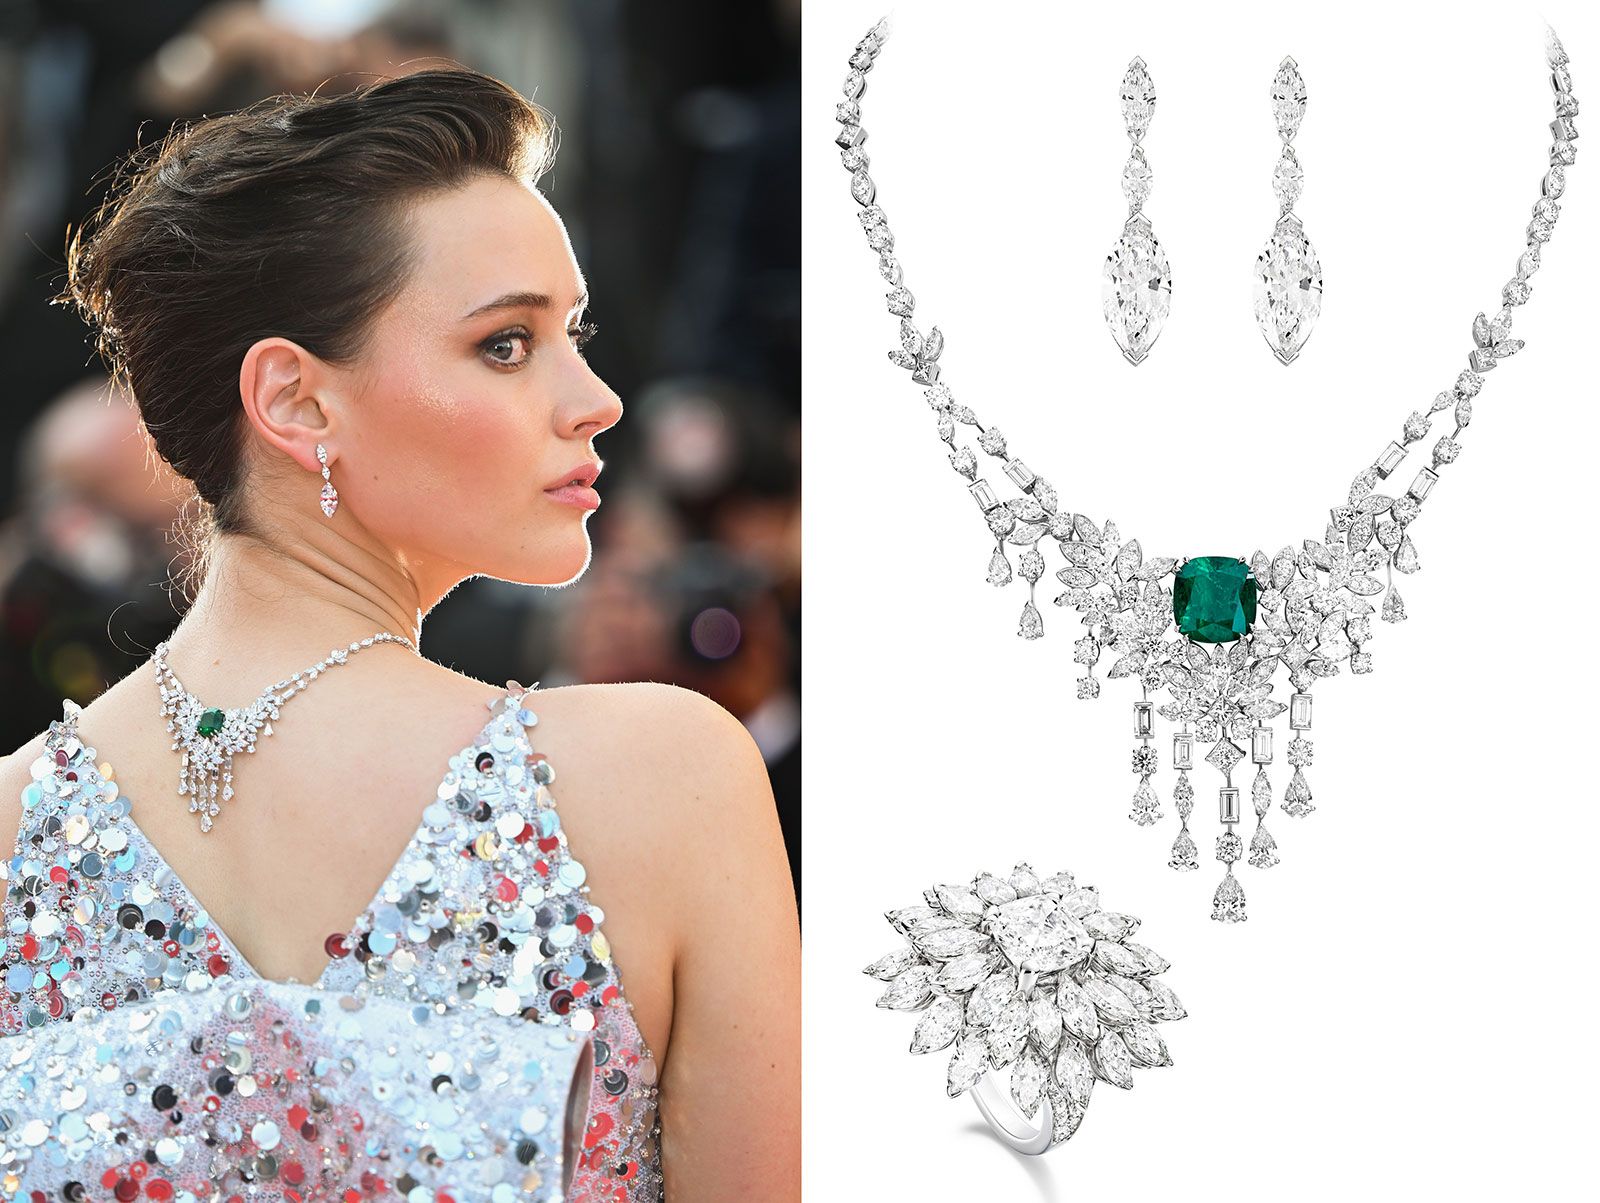 Katherine Langford wearing Piaget High Jewellery at the Cannes Film Festival 2022